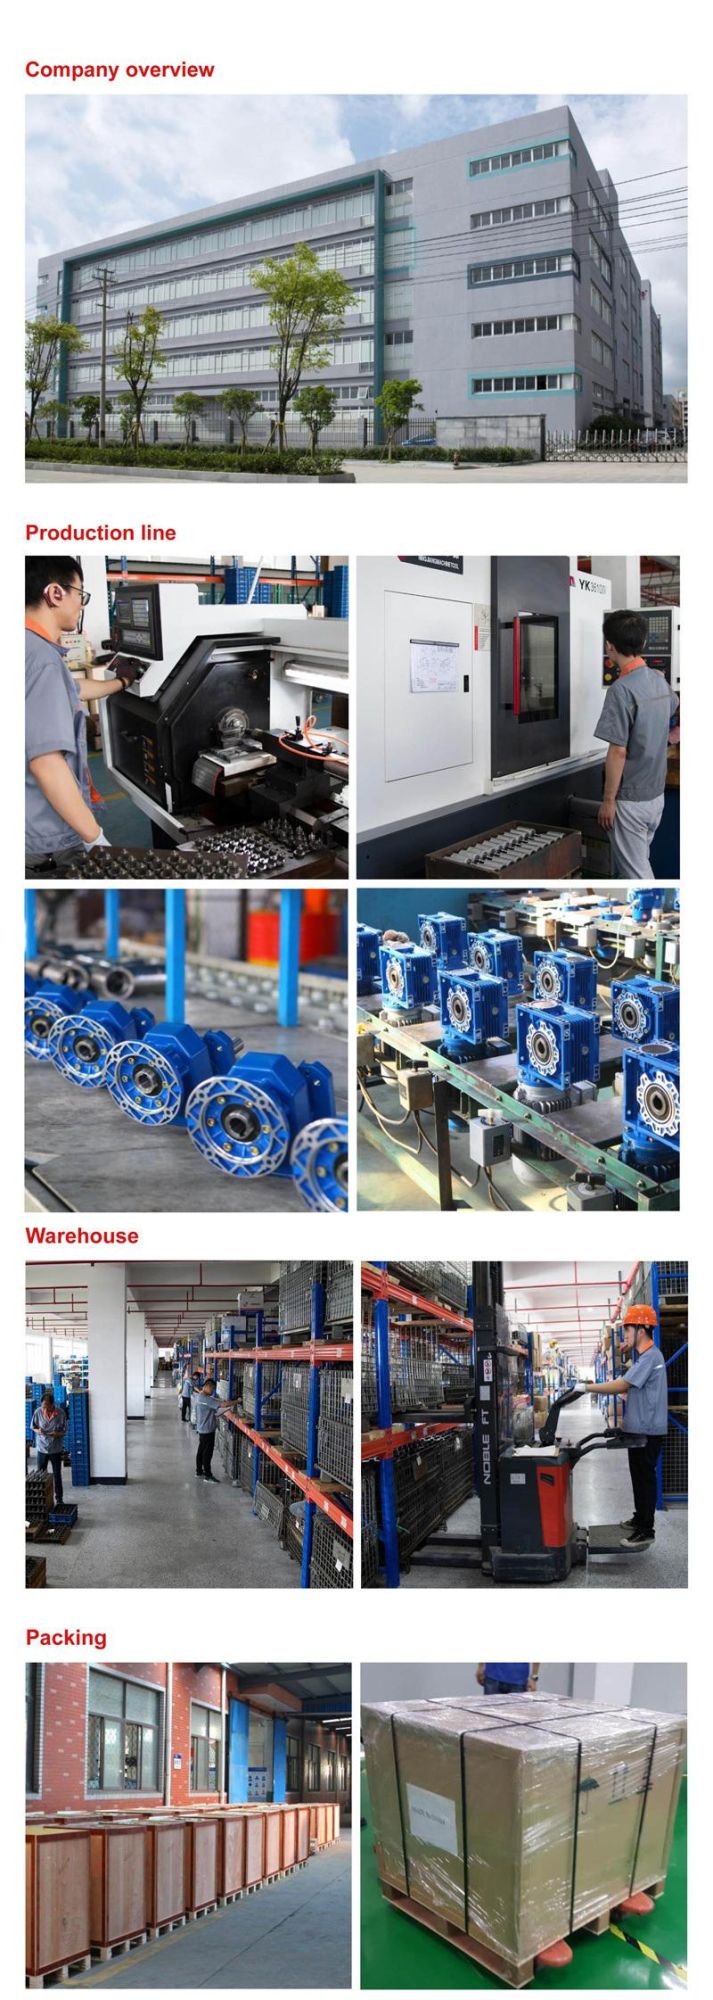 Aluminium Die-Cast Worm Gearing Arrangement and Construction Works Applicable Industries Worm Gear Reducer